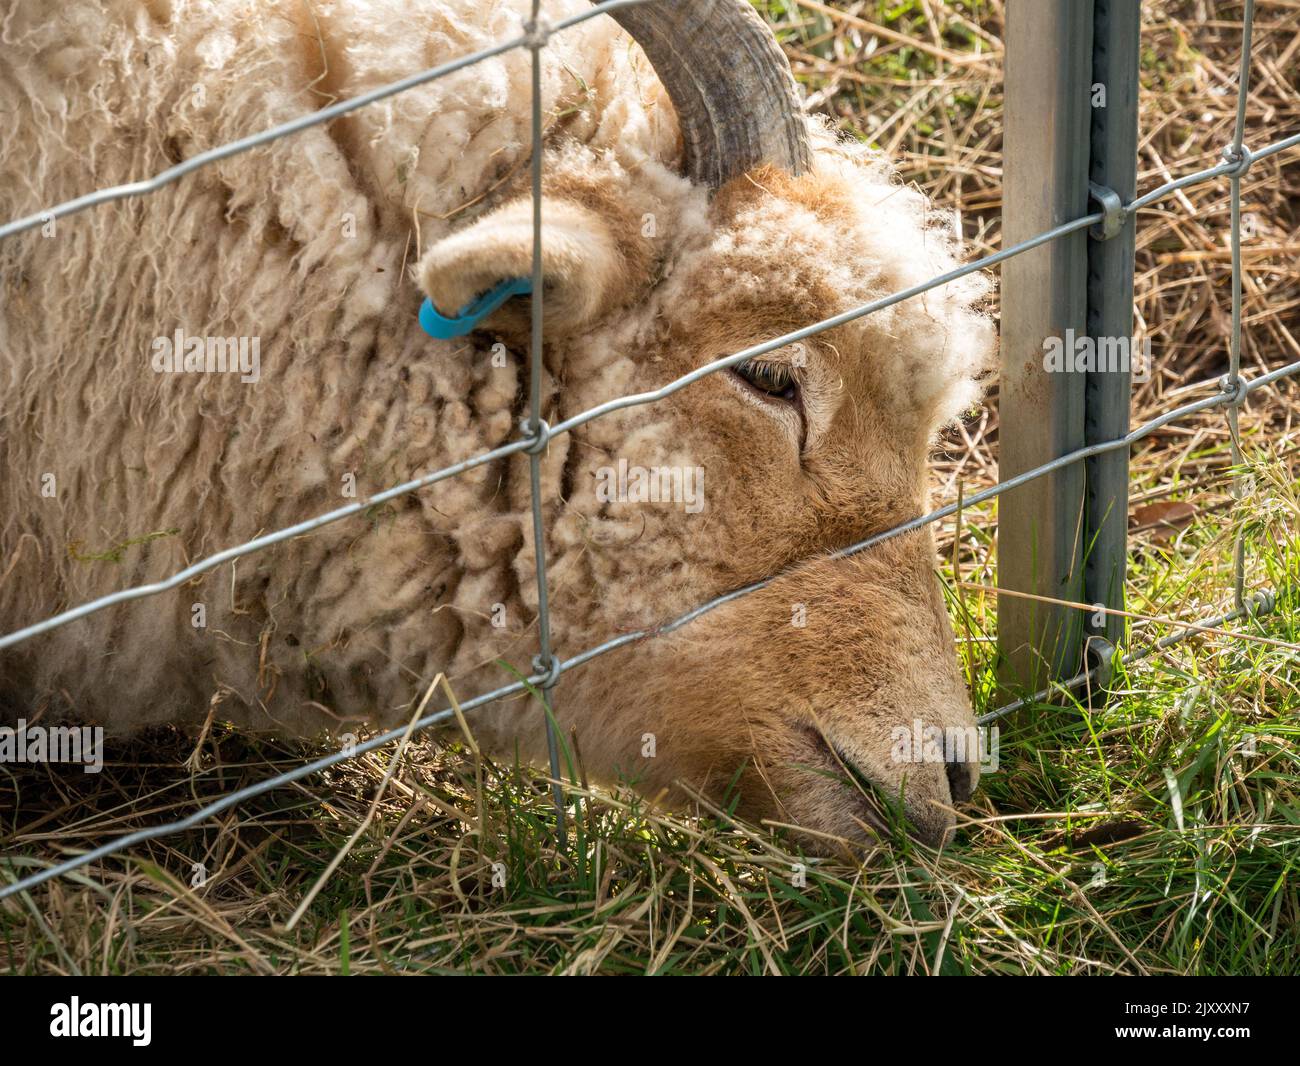 Concept image - 'The grass is greener on the other side of the fence' illustrated by a Portland sheep eating grass through wire fence. Stock Photo